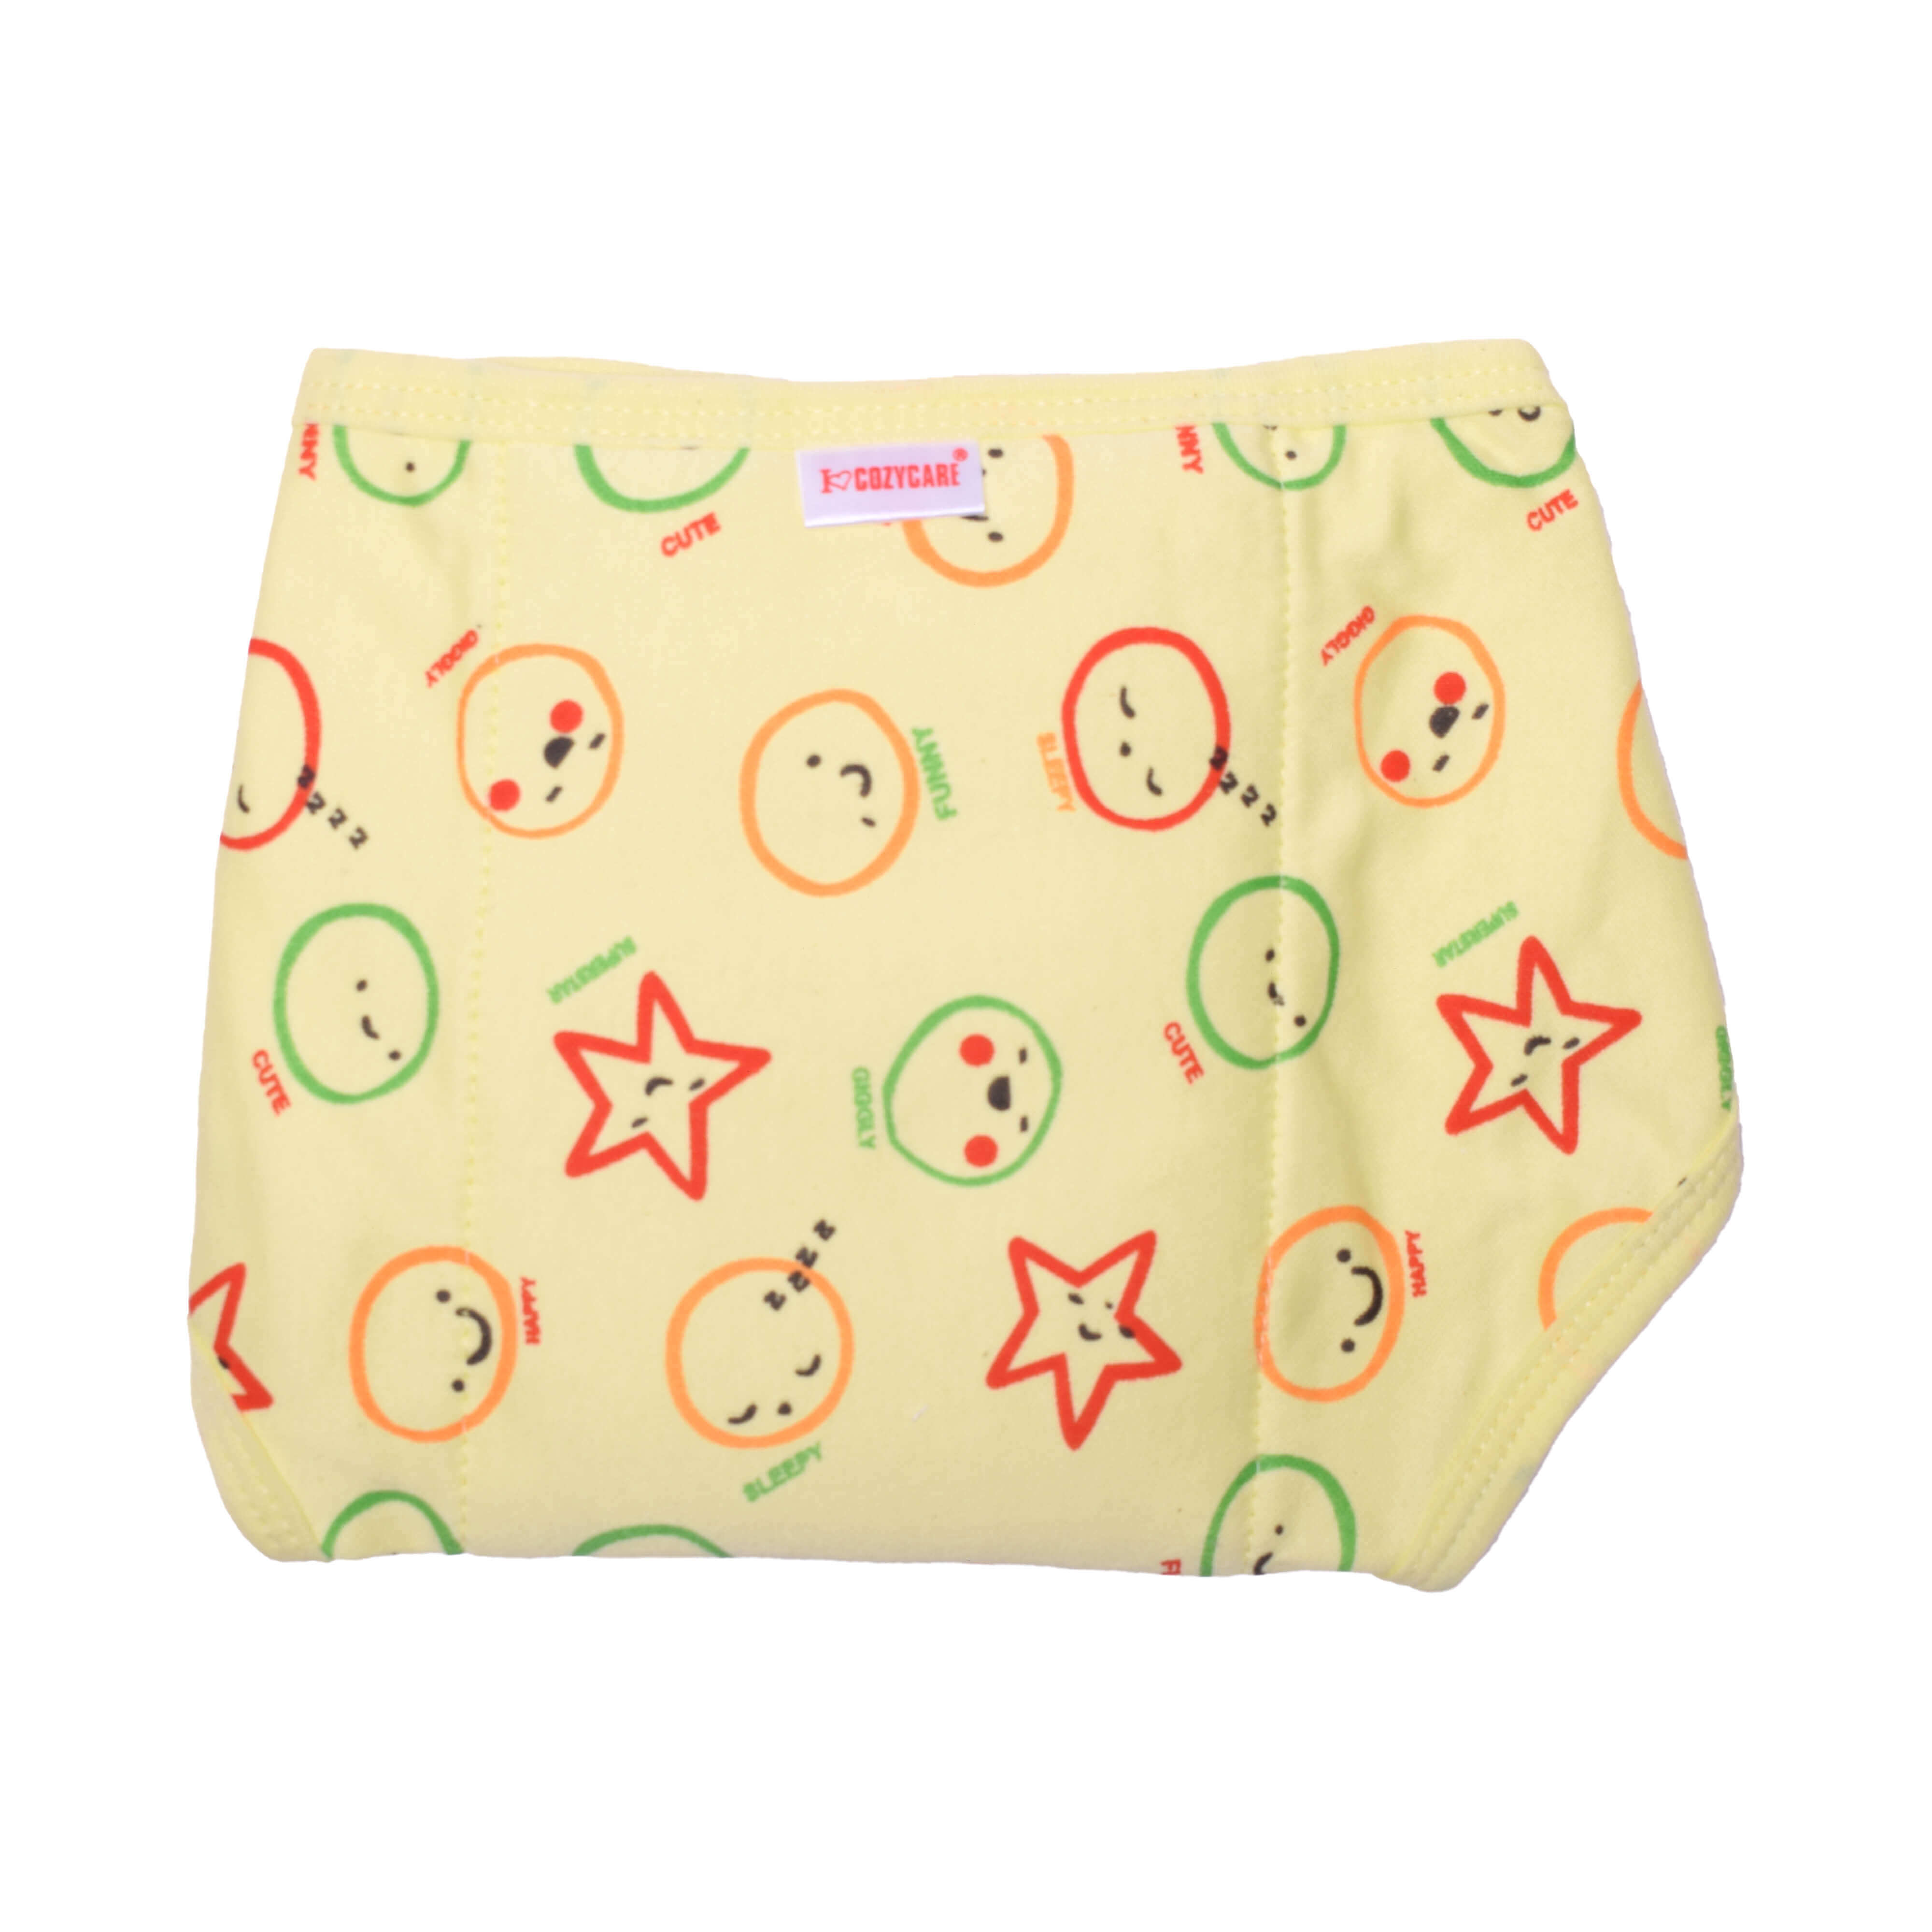 Care Washable Diapers Hosiery Velcro Emoji Print Blue, Yellow & Pink 3P Set (S)